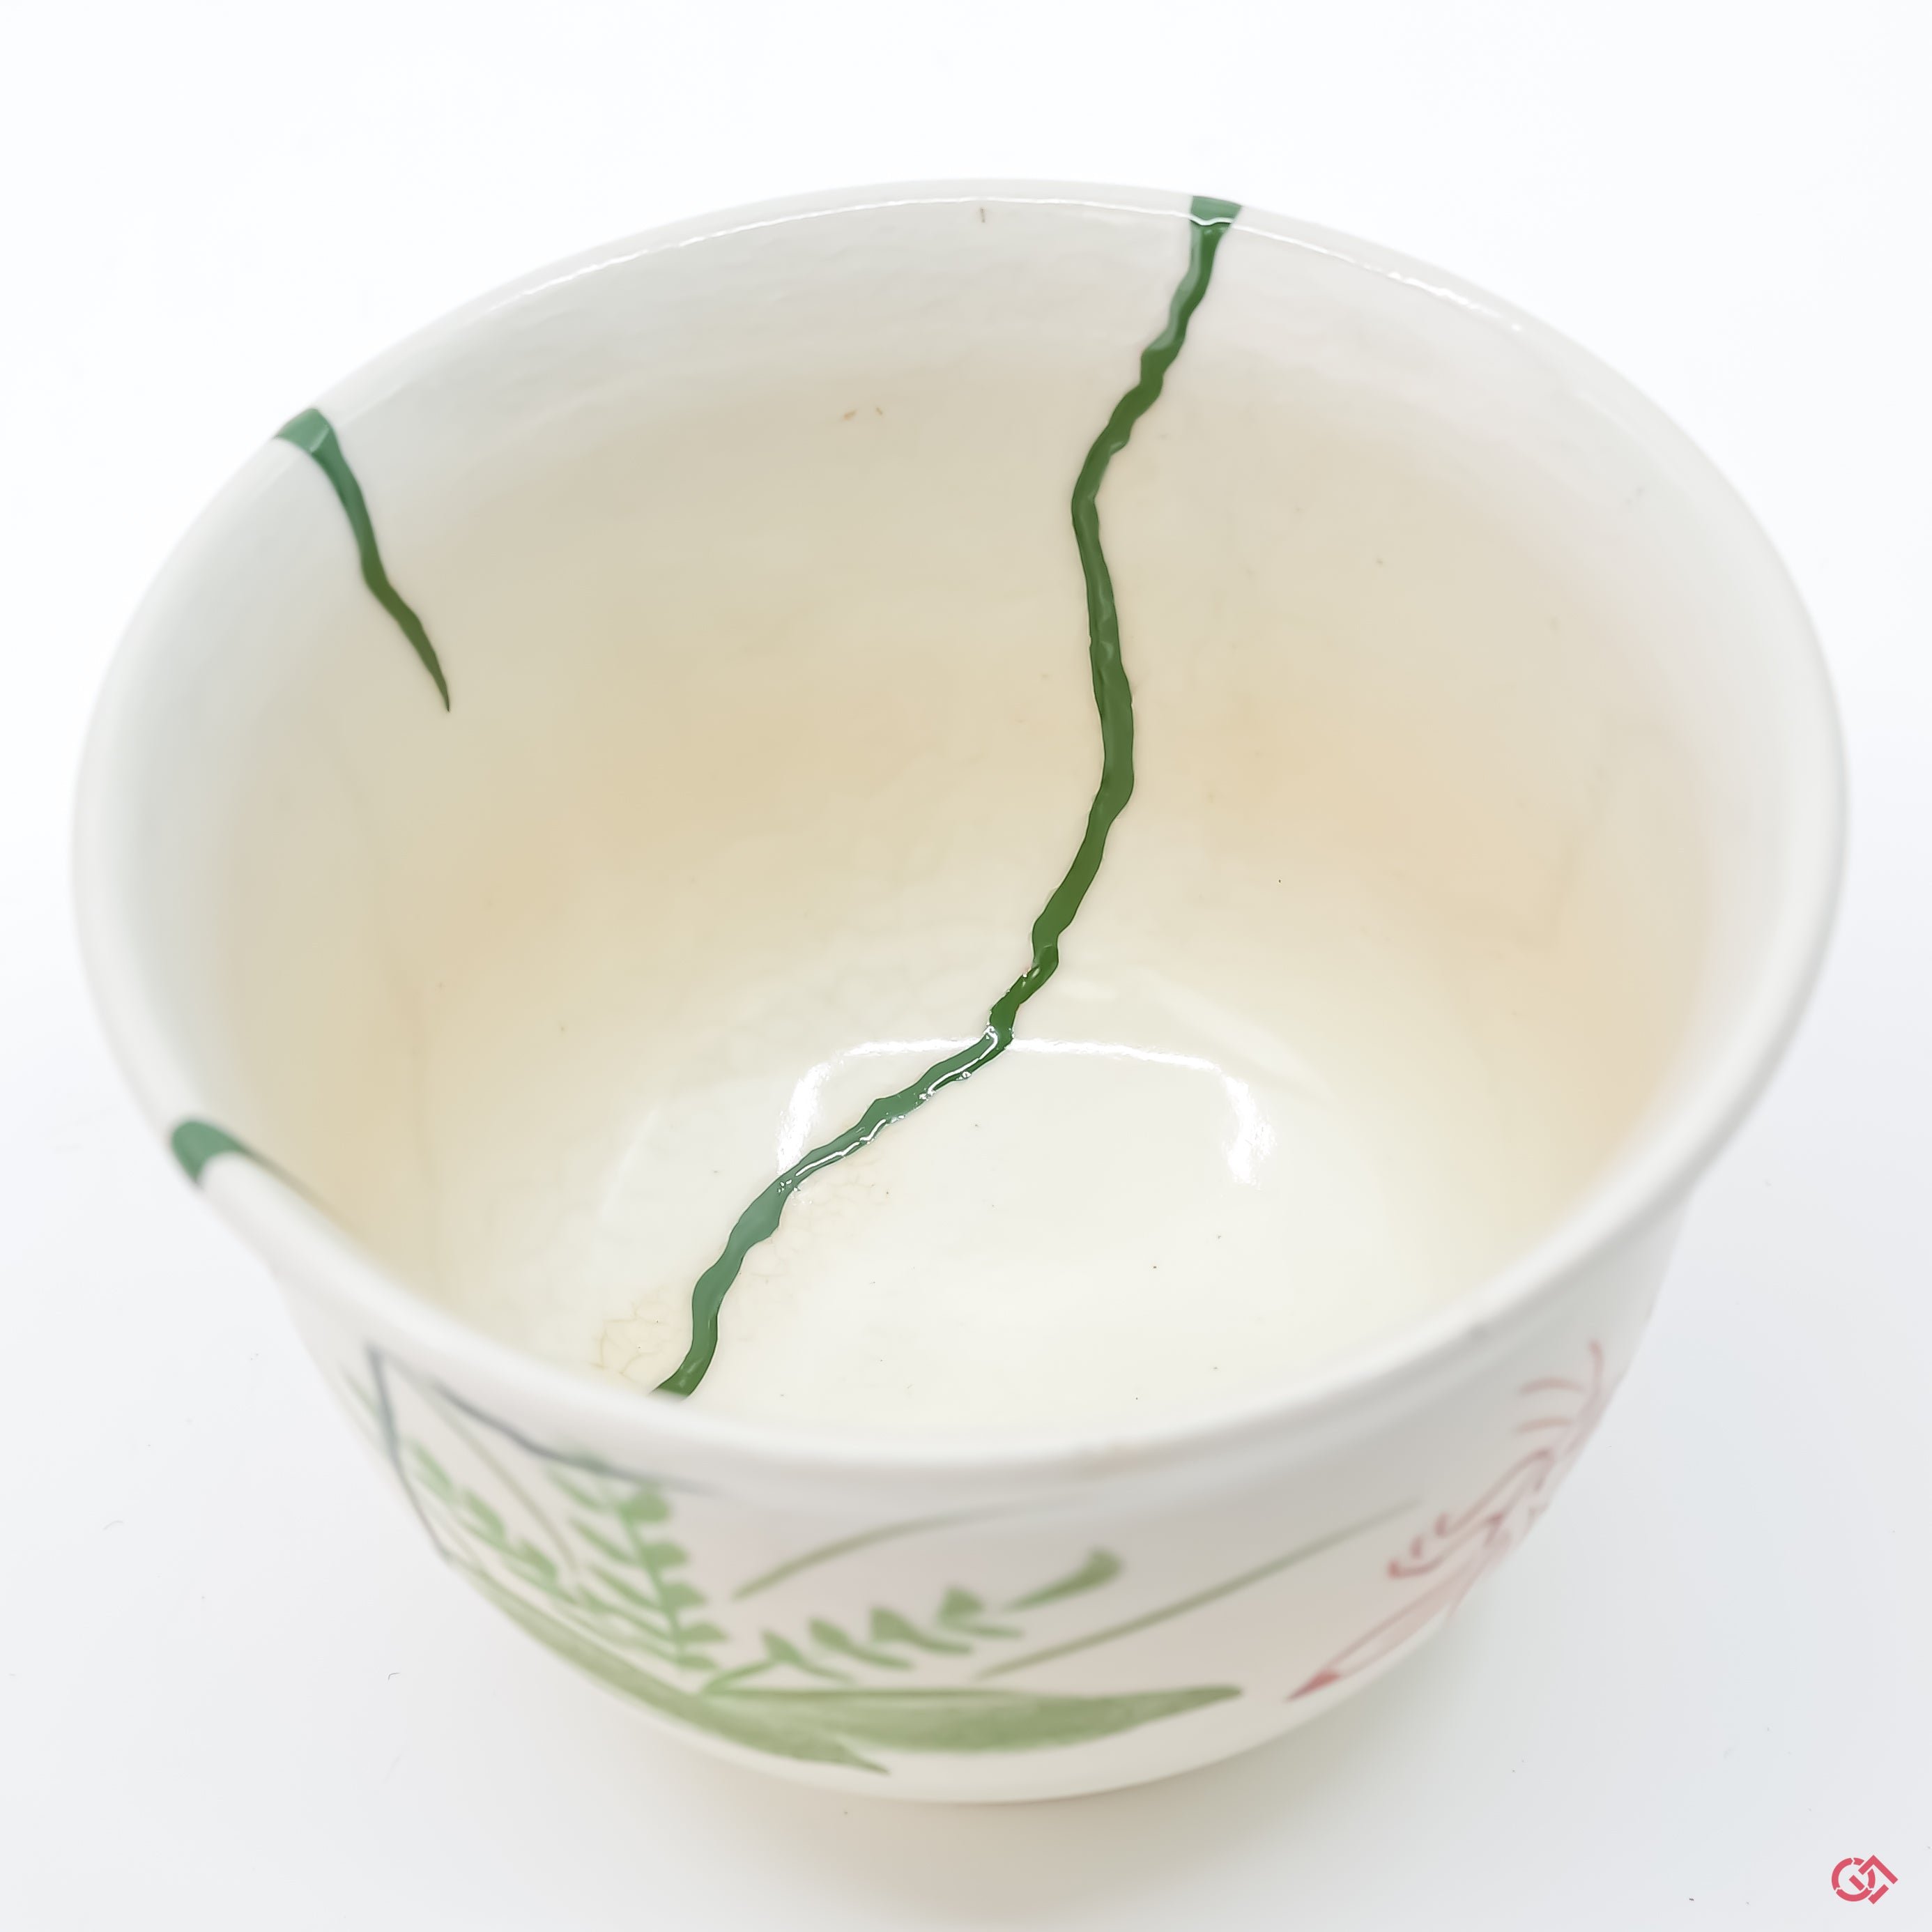 Close-up photo of an authentic Kintsugi pottery, showing the detail of its repairs and craftsmanship